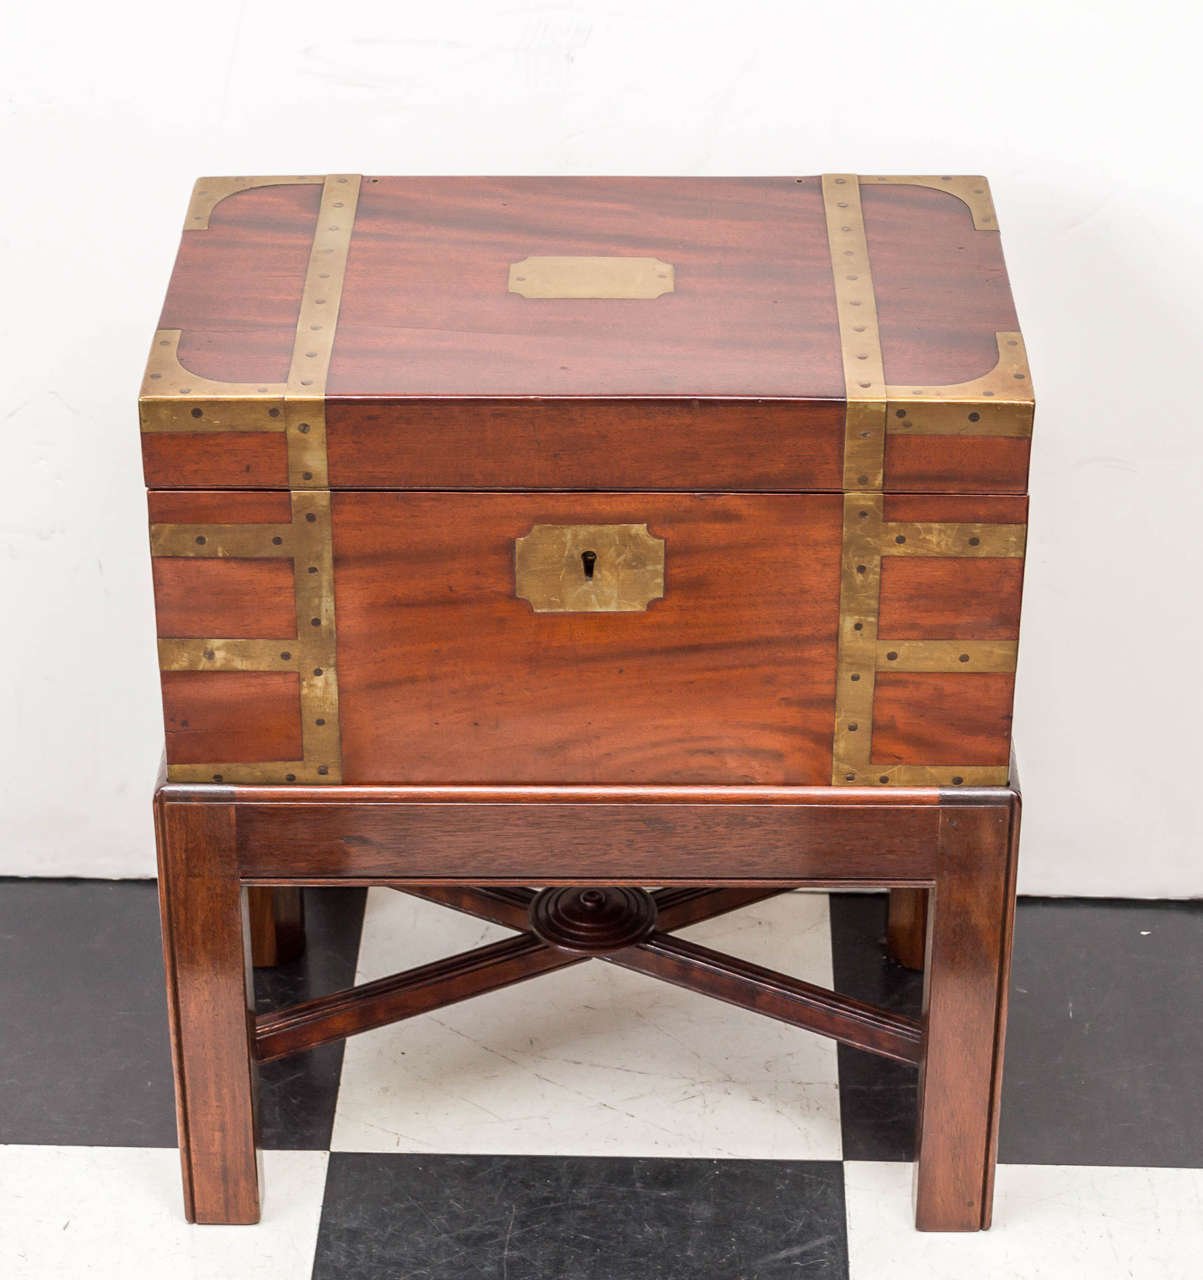 19th c. English Regency fitted writing box on stand. Hidden compartment fitted with three small drawers. Original ink pots, side drawer and writing surfaces. Custom mahogany later stand. Includes keys to all locks. Circa 1815.